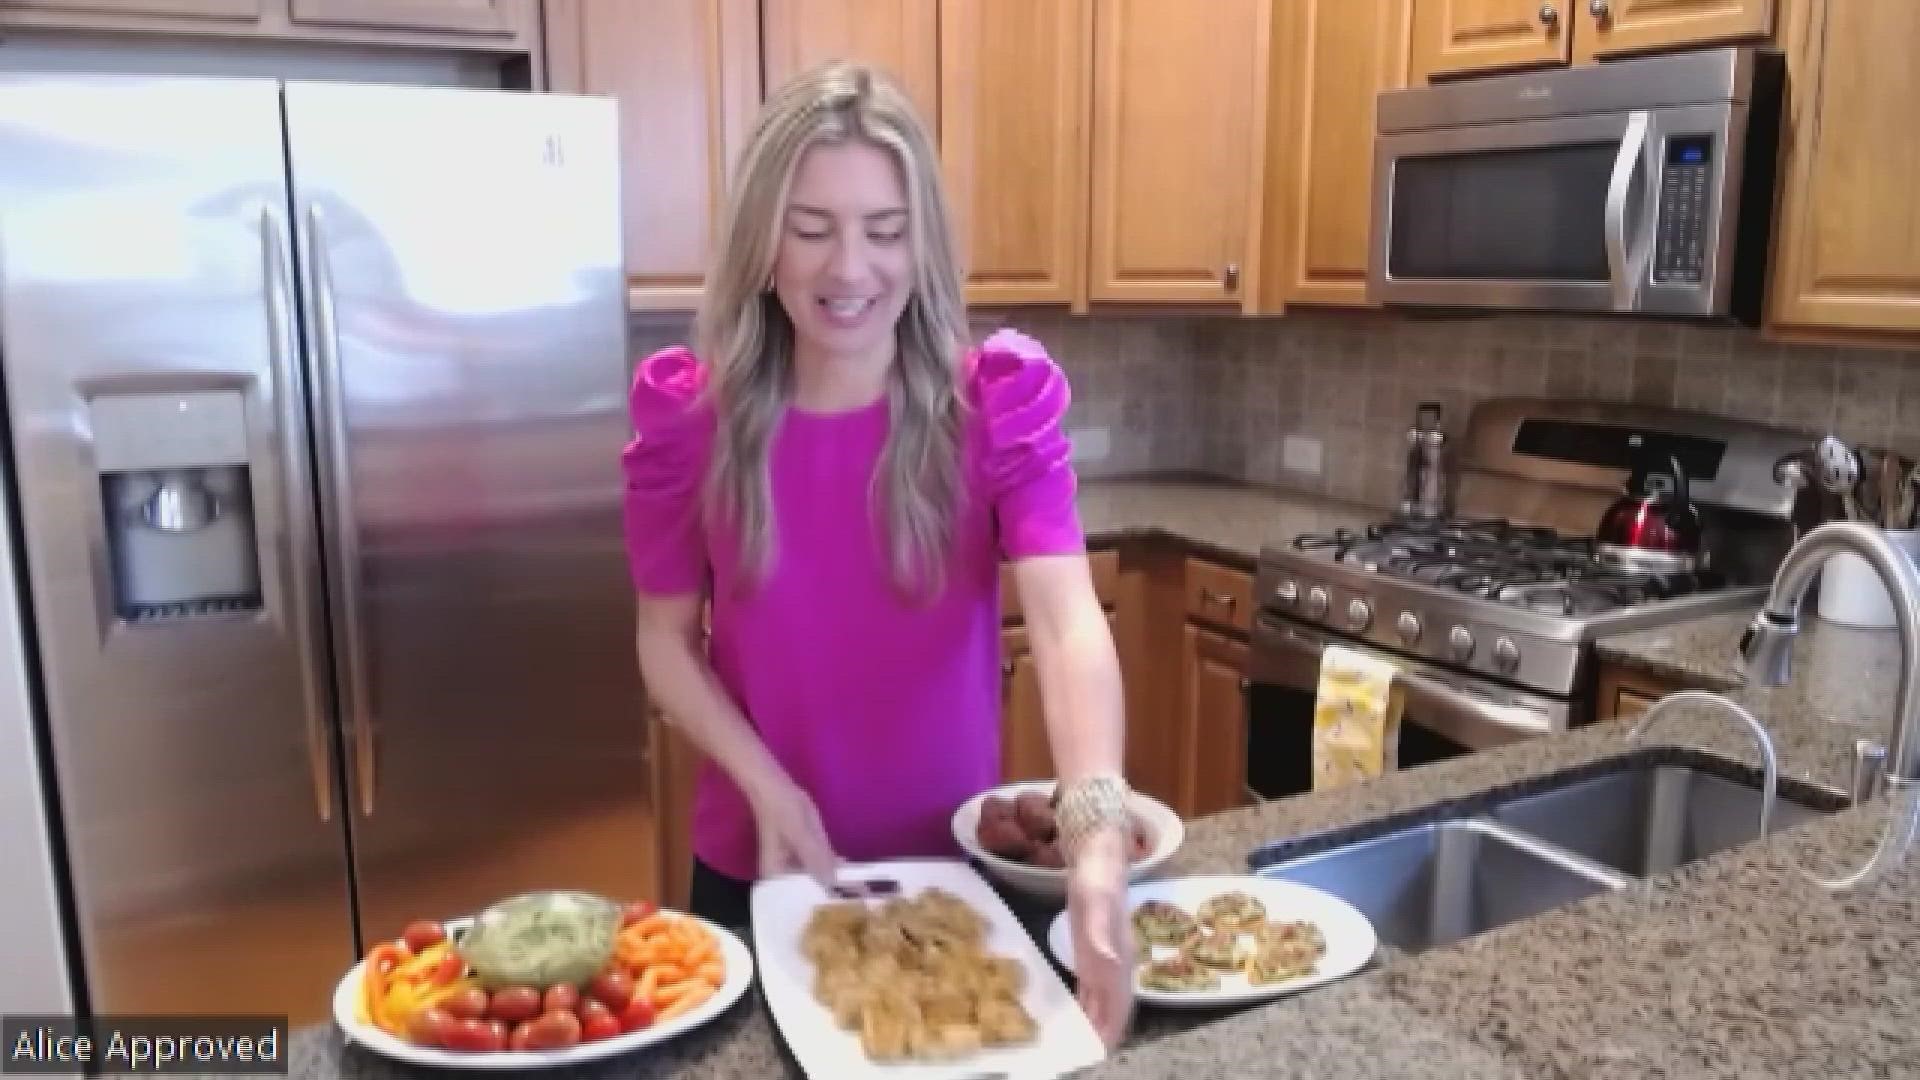 Dietitian and Health Coach Alice Smith shows us some healthy Super Bowl snacks